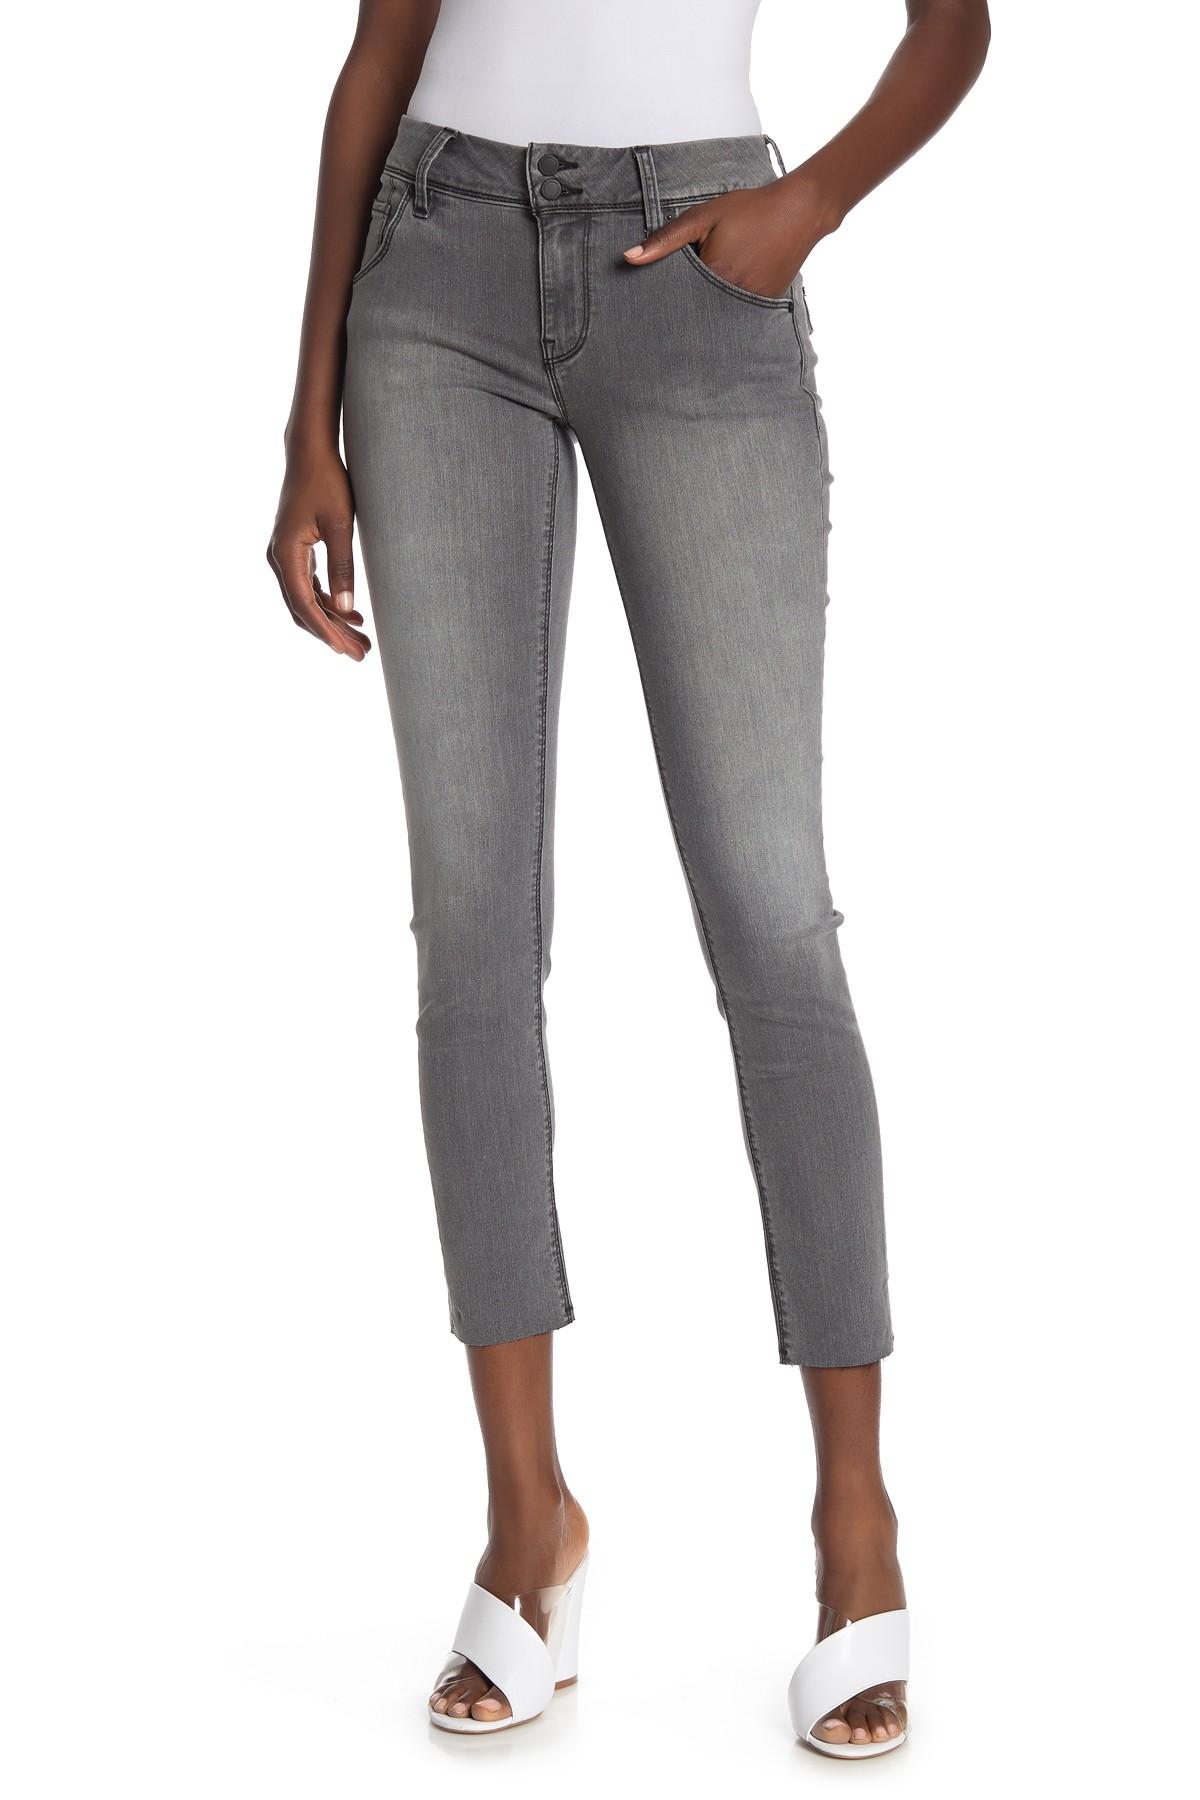 Hudson Jeans Collin Mid Rise Skinny Ankle Jeans in Gray - Lyst